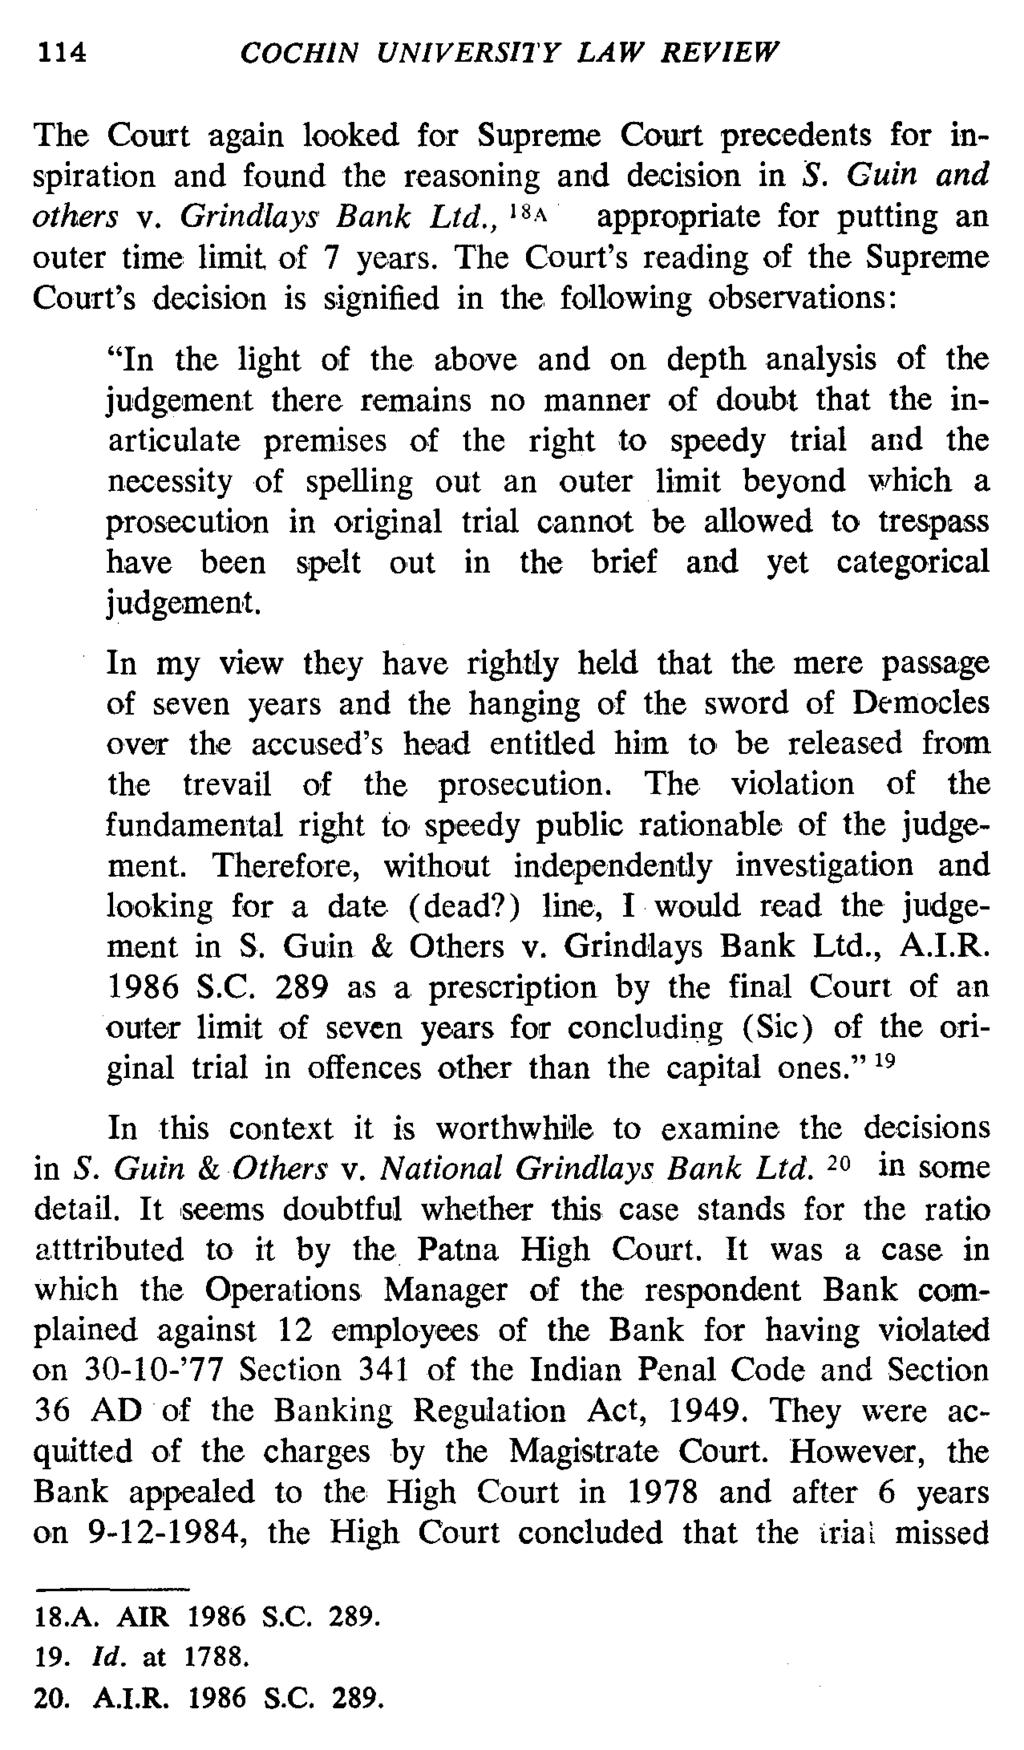 114 COCHIN UNIVERSITY LAW REVIEW The Court again looked for Supreme Court precedents for inspiration and found the reasoning and decision in S. Guin and others v. Grindlays Bank Ltd.